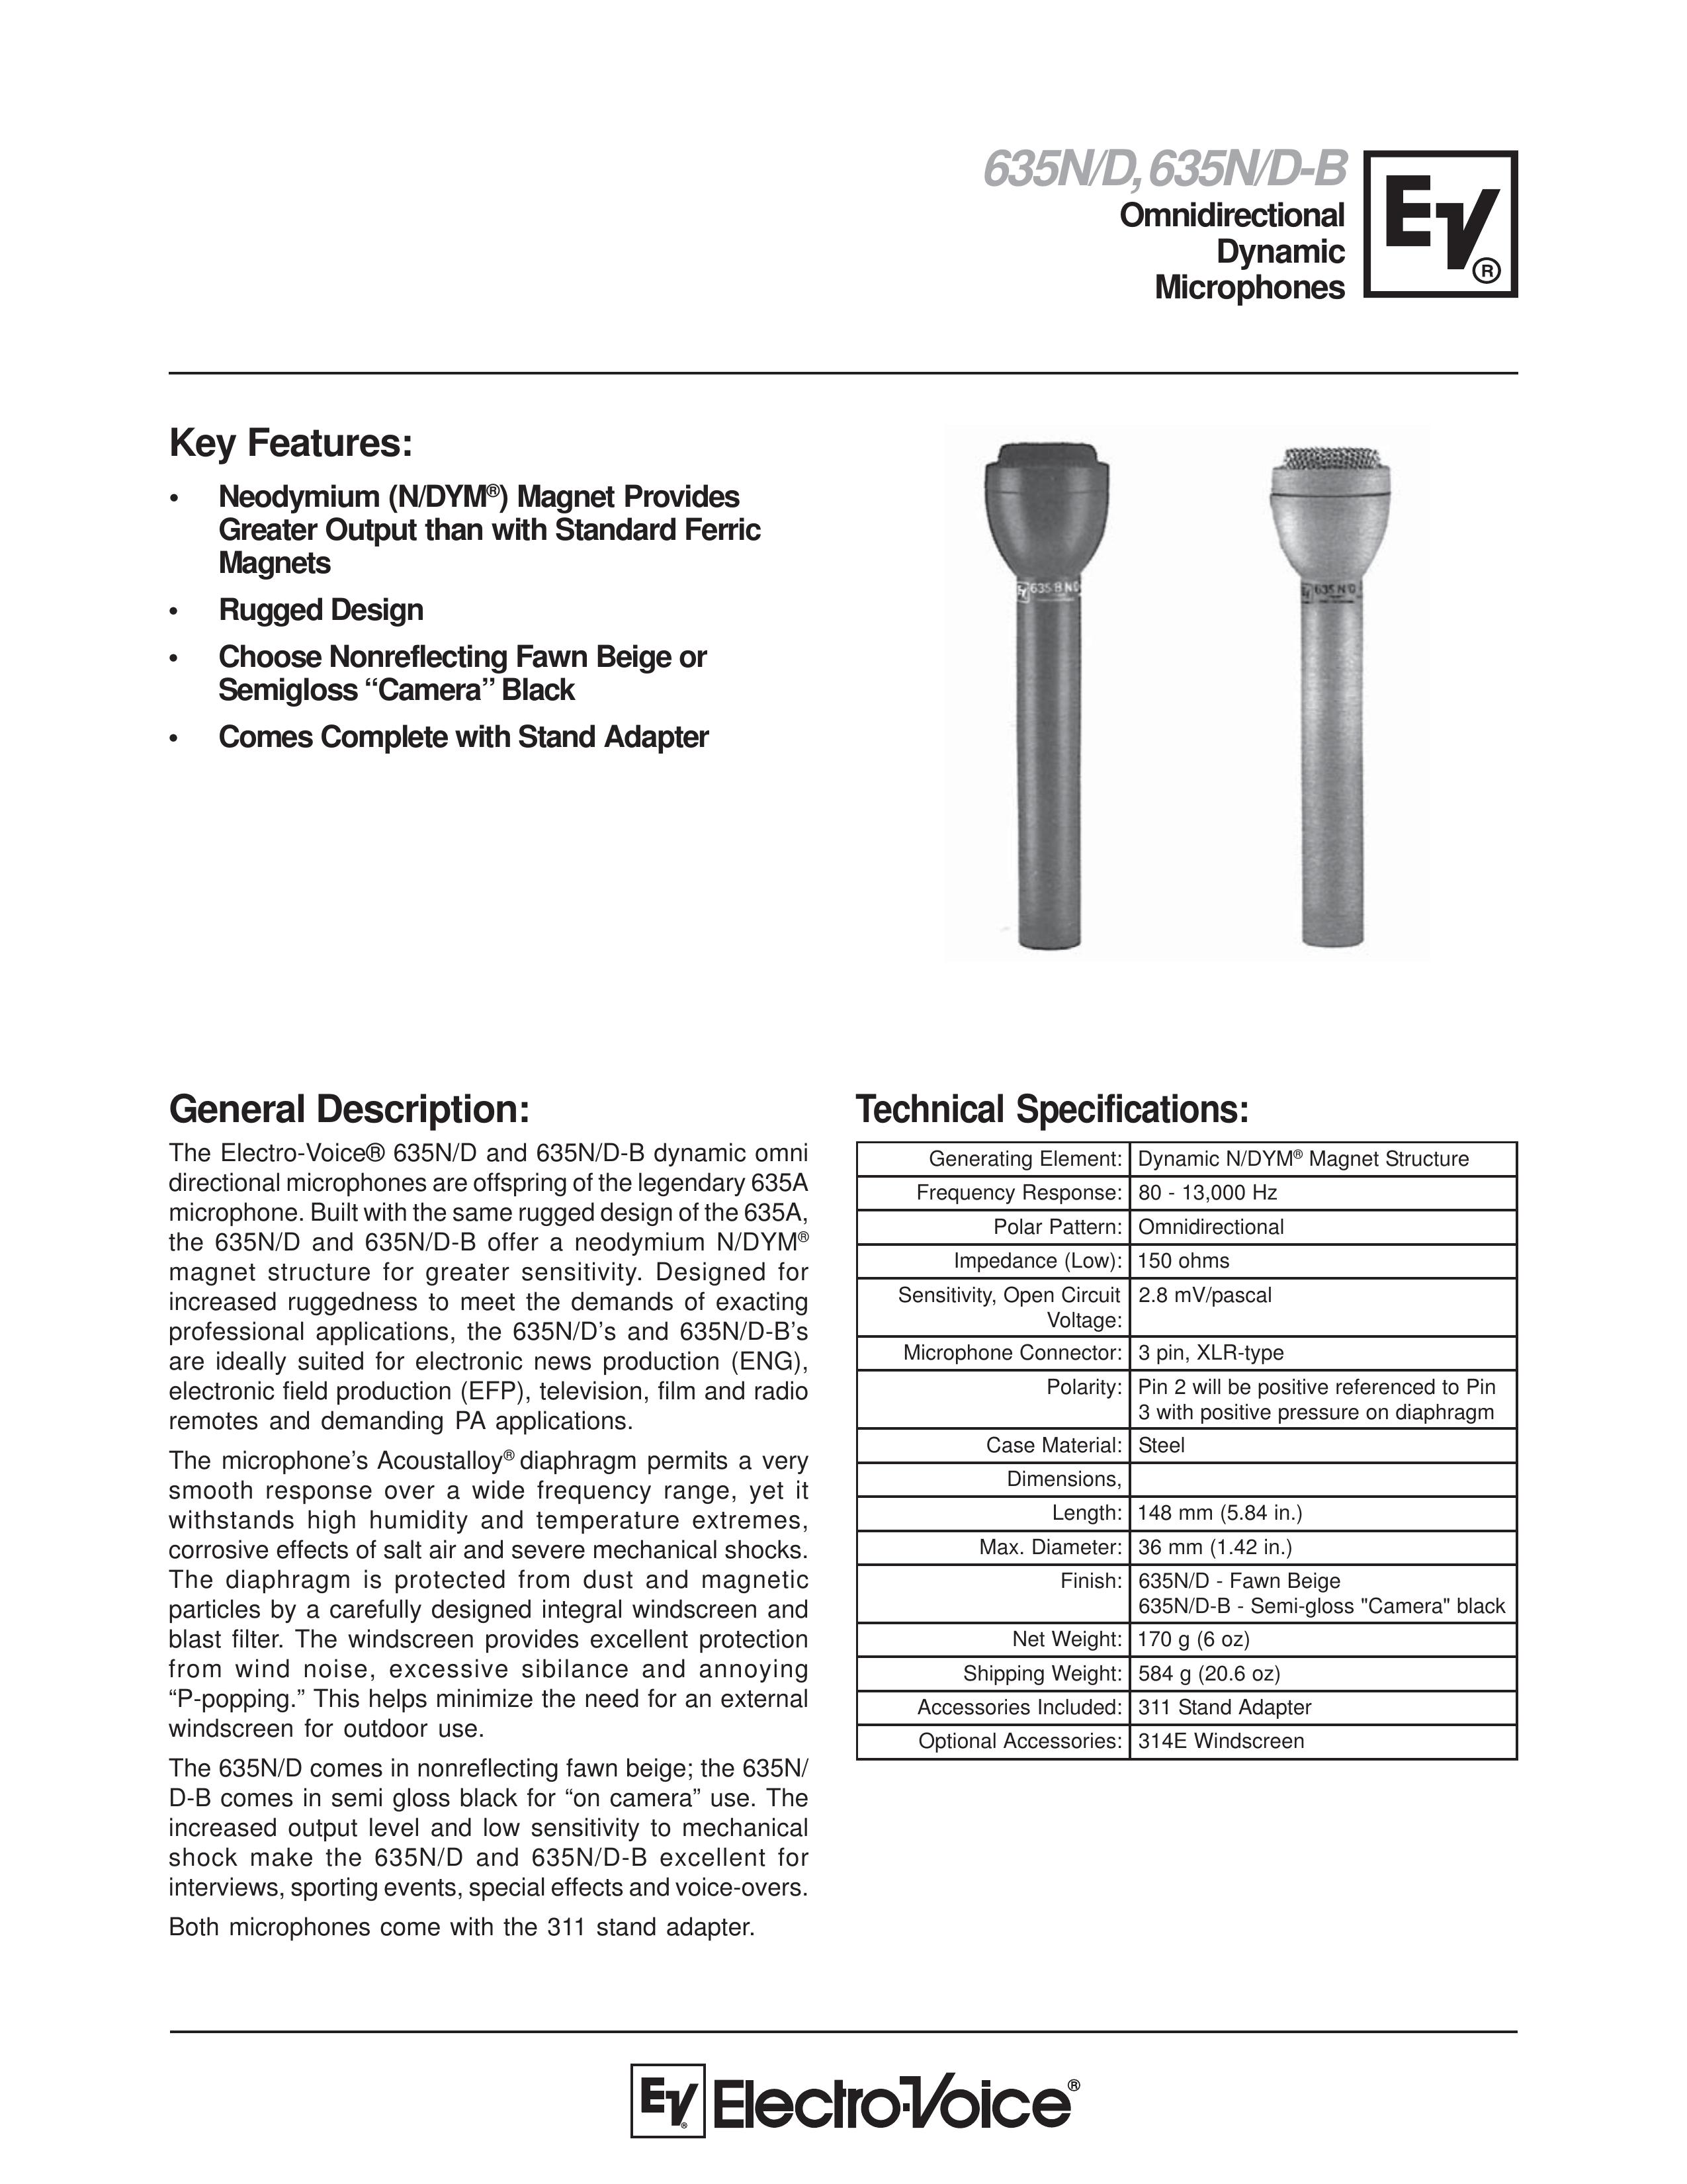 Electro-Voice 635N/D Microphone User Manual